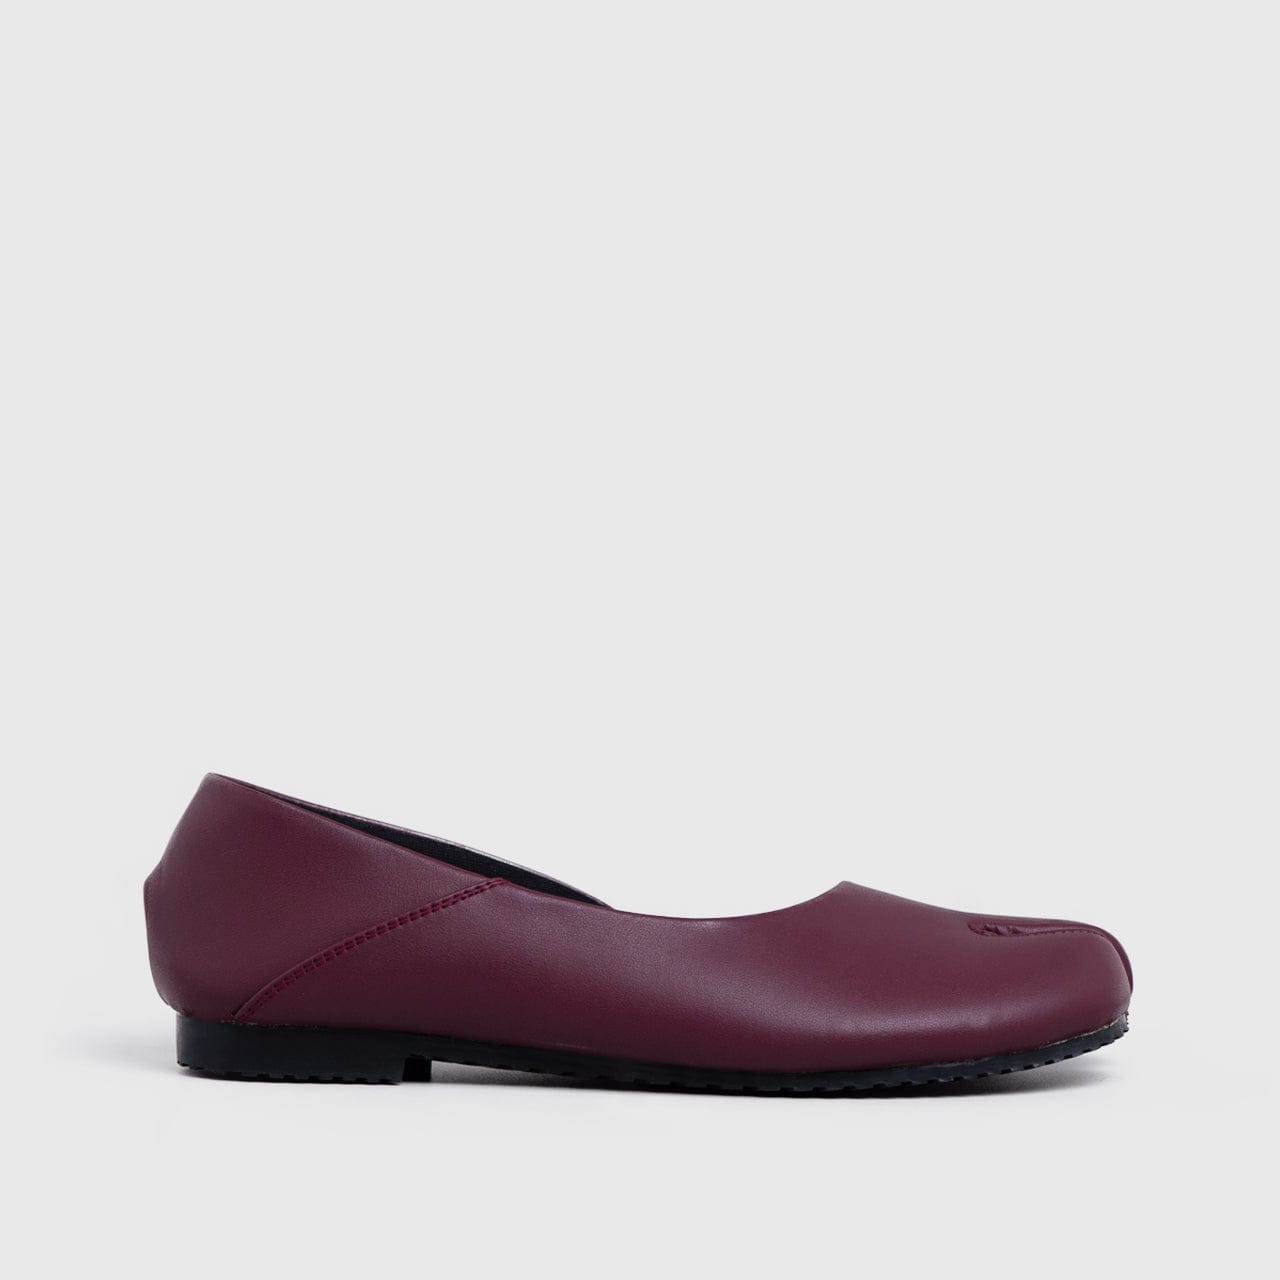 Adorable Projects Official Adorableprojects - Lulula Flat Shoes Genuine Leather Wild Ginger